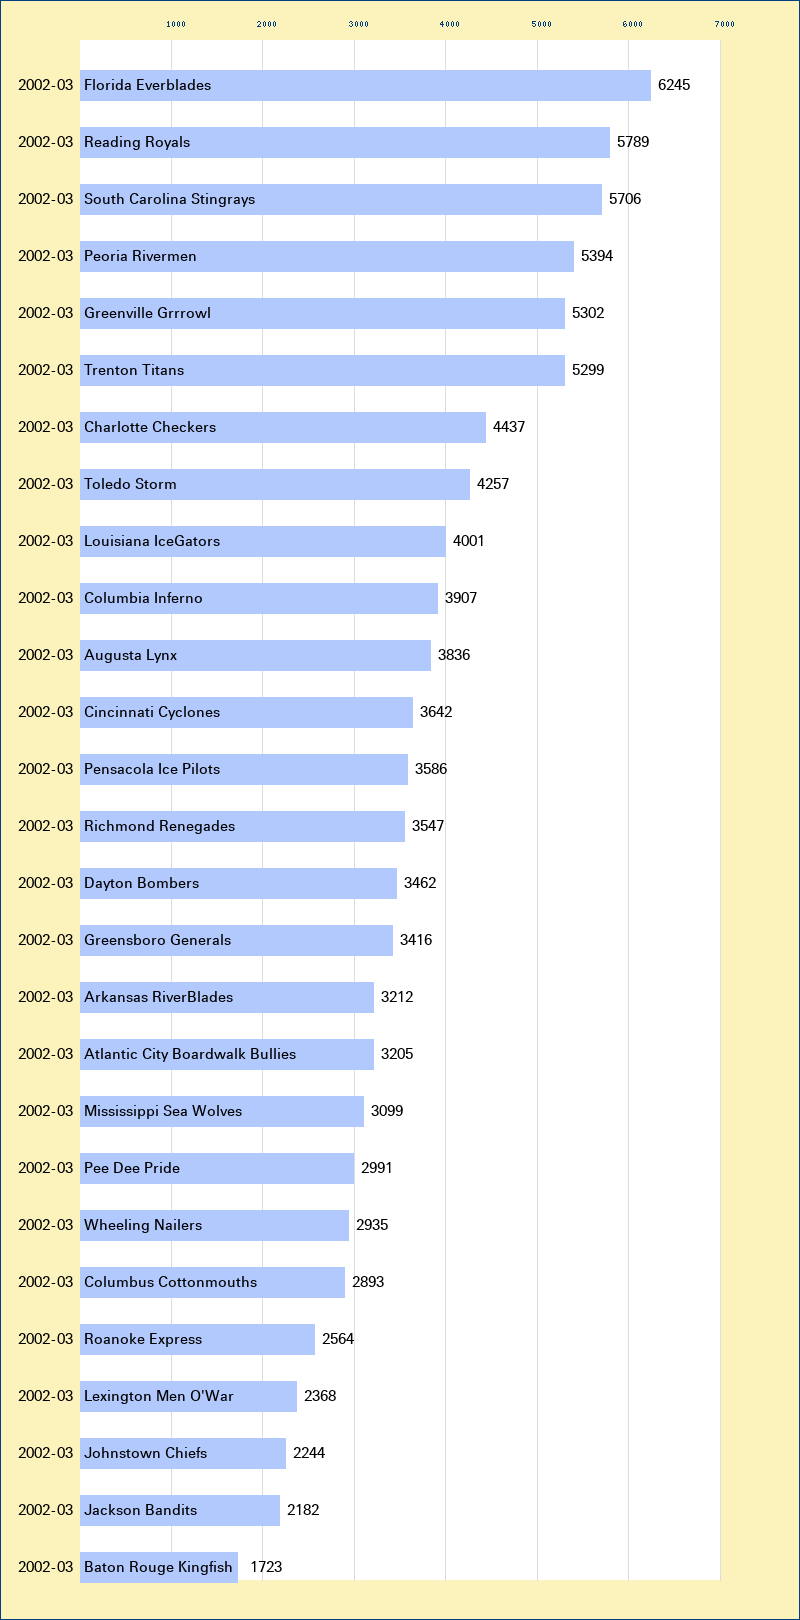 Attendance graph of the ECHL for the 2002-03 season